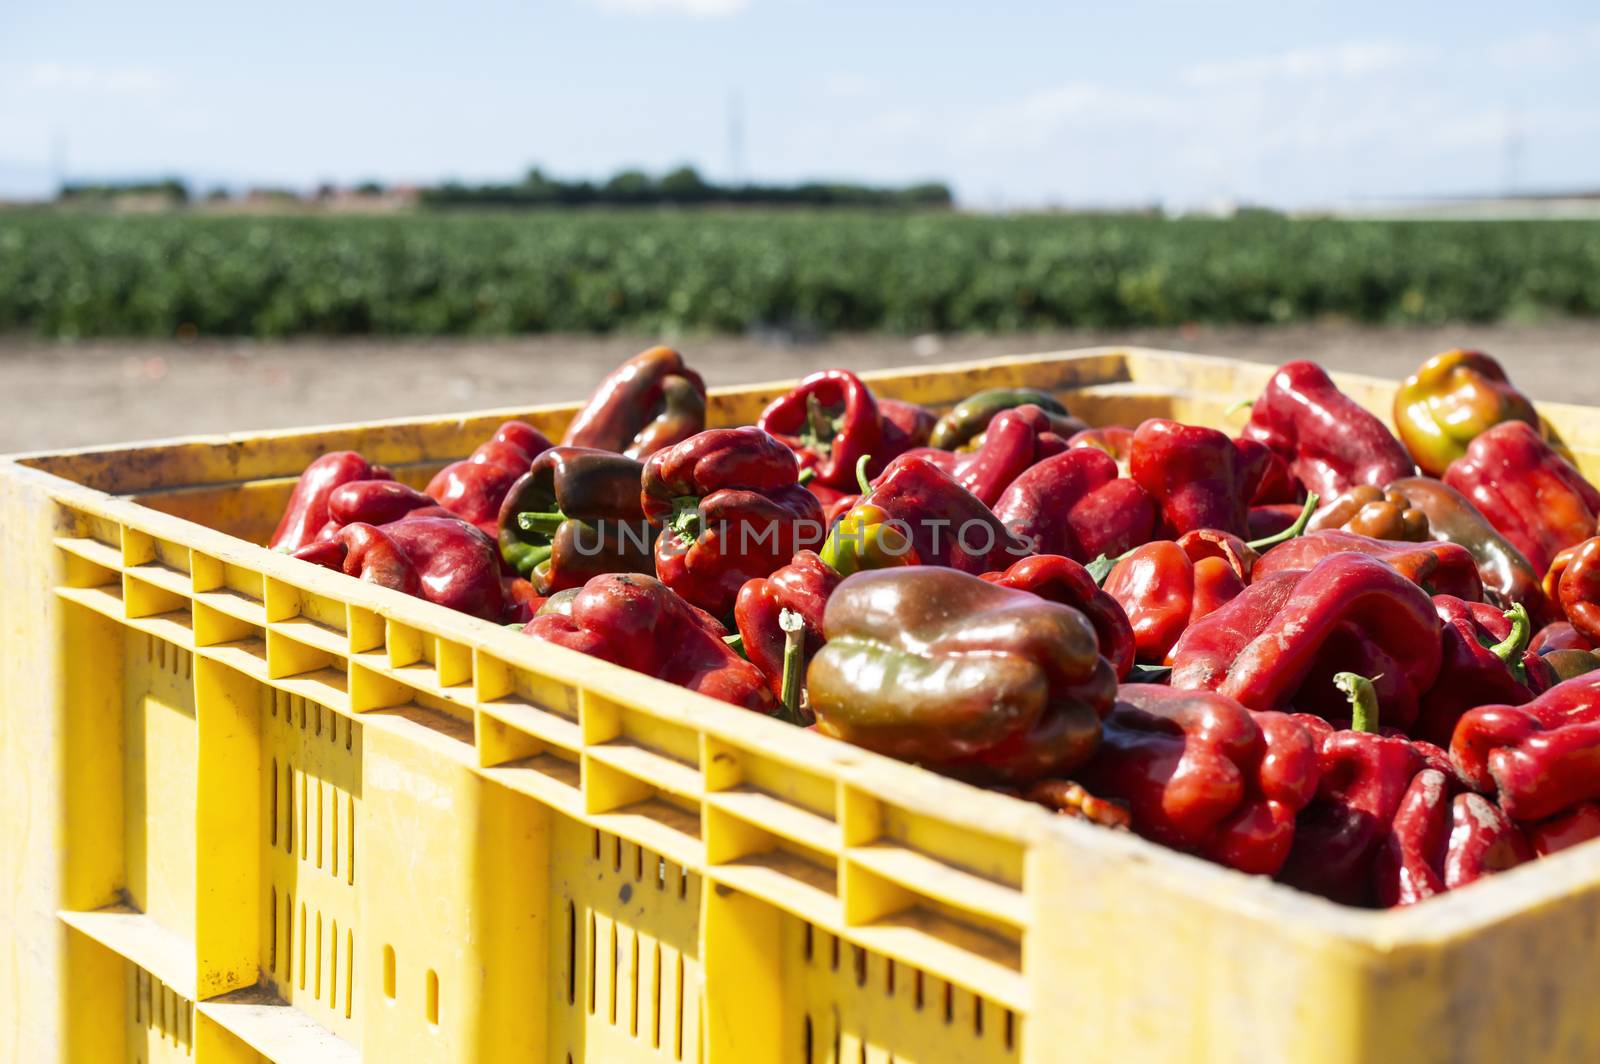 Mature big red peppers in crate ready for transport from the farm. Close-up peppers and agricultural land.